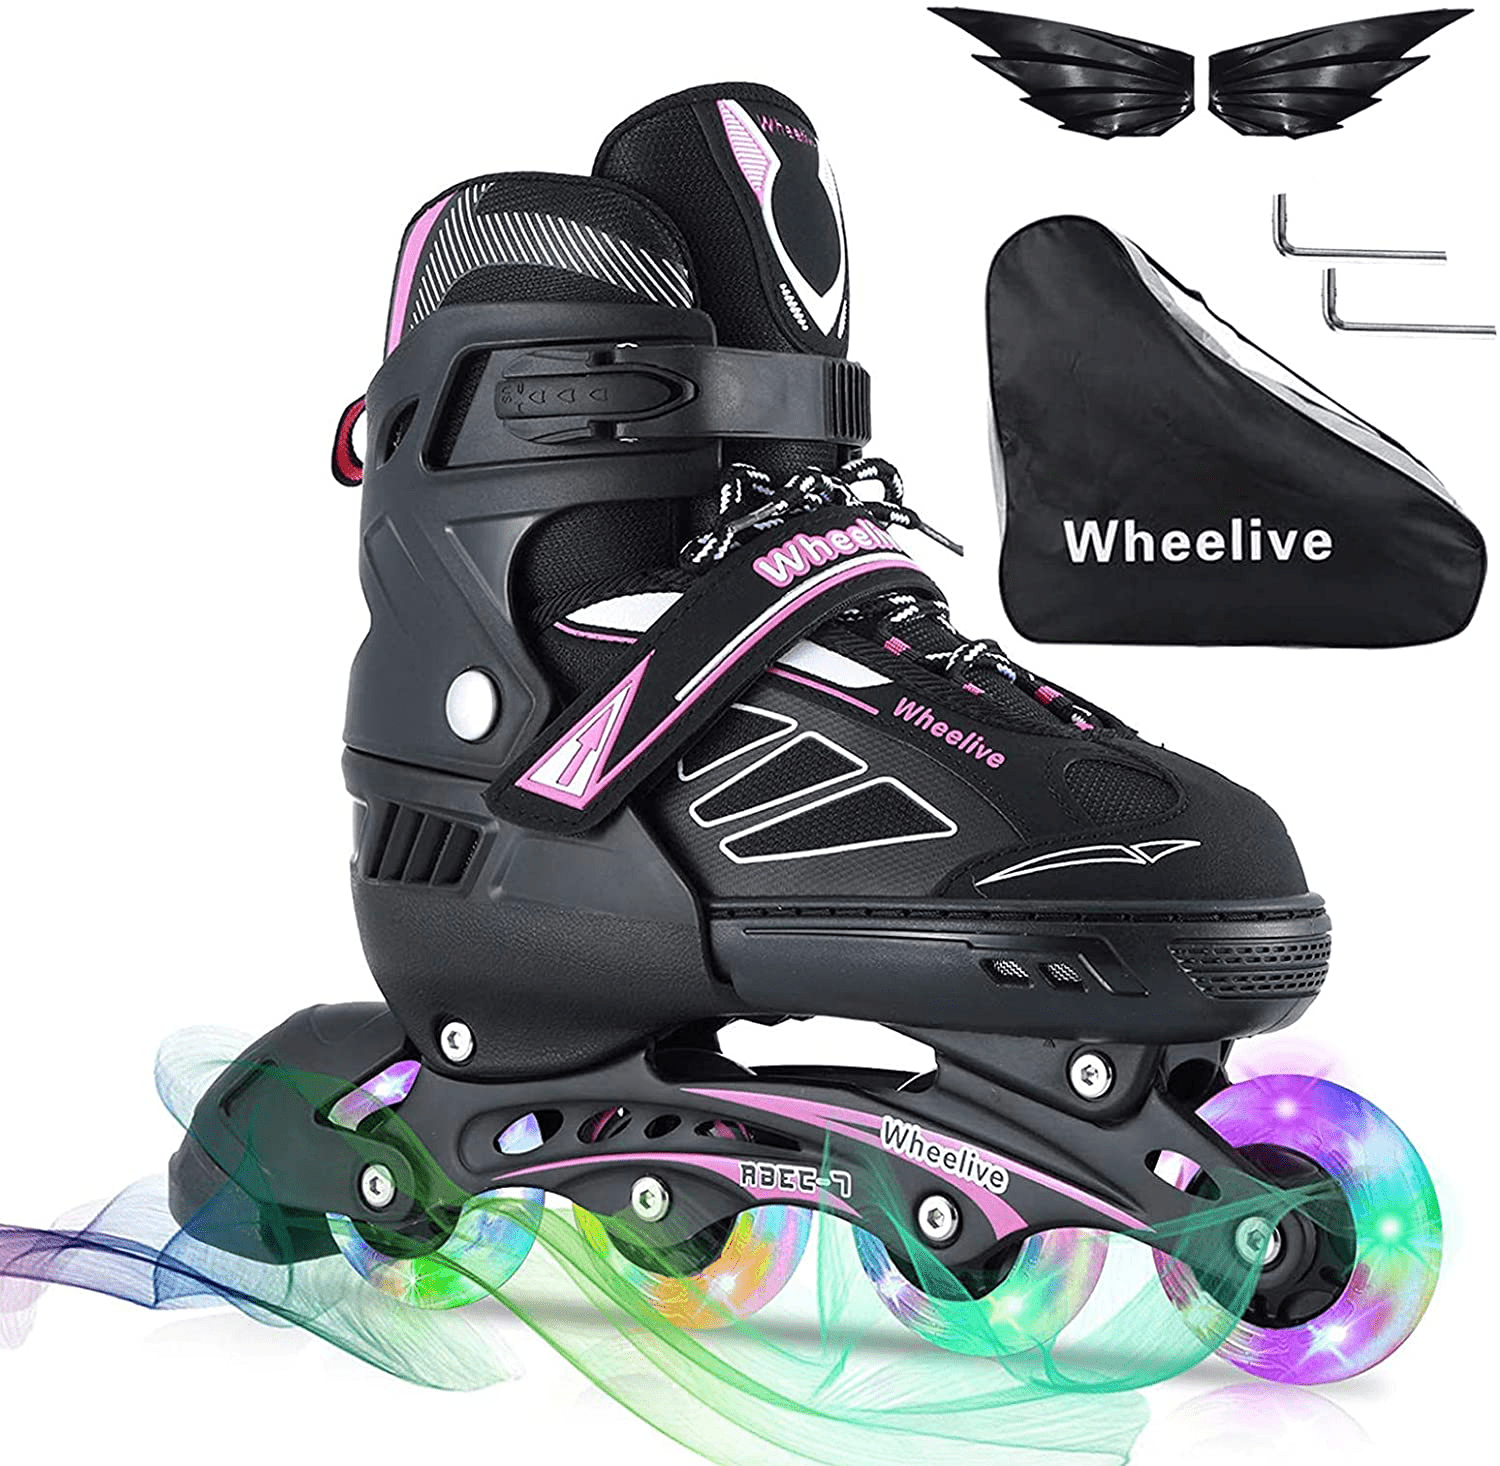 Details about   Roller Skating Adjustable Inline Skates with Illuminating Wheels Unisex S/M/L US 